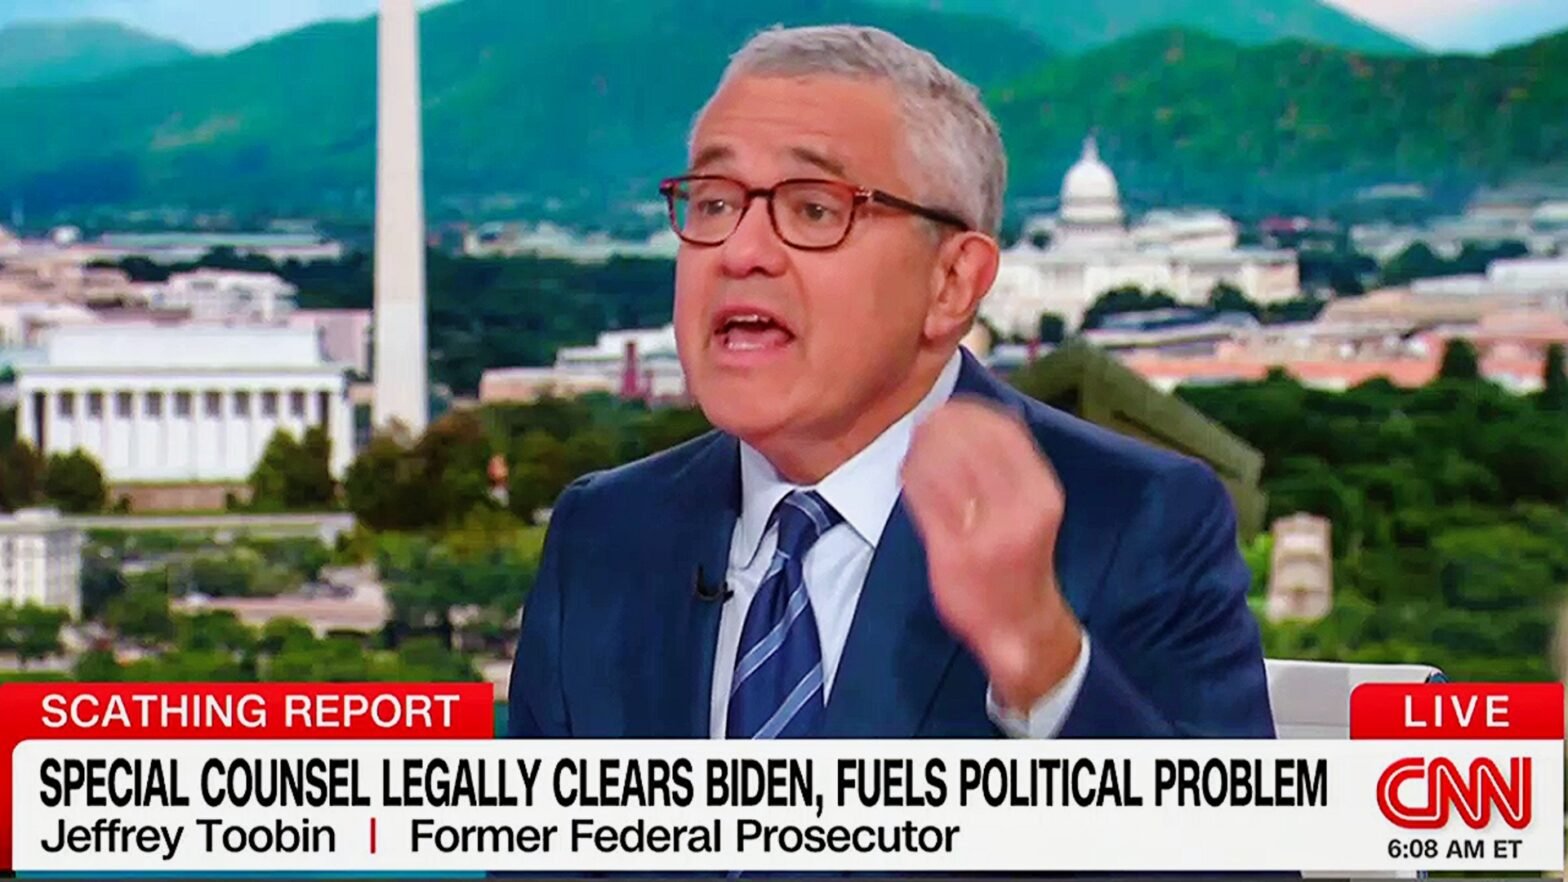 ‘an-outrage!-a-disgrace!’-legal-expert-toobin-rips-special-counsel-report-for-biden-slams-on-cnn-—-‘mistake’-to-appoint-republican